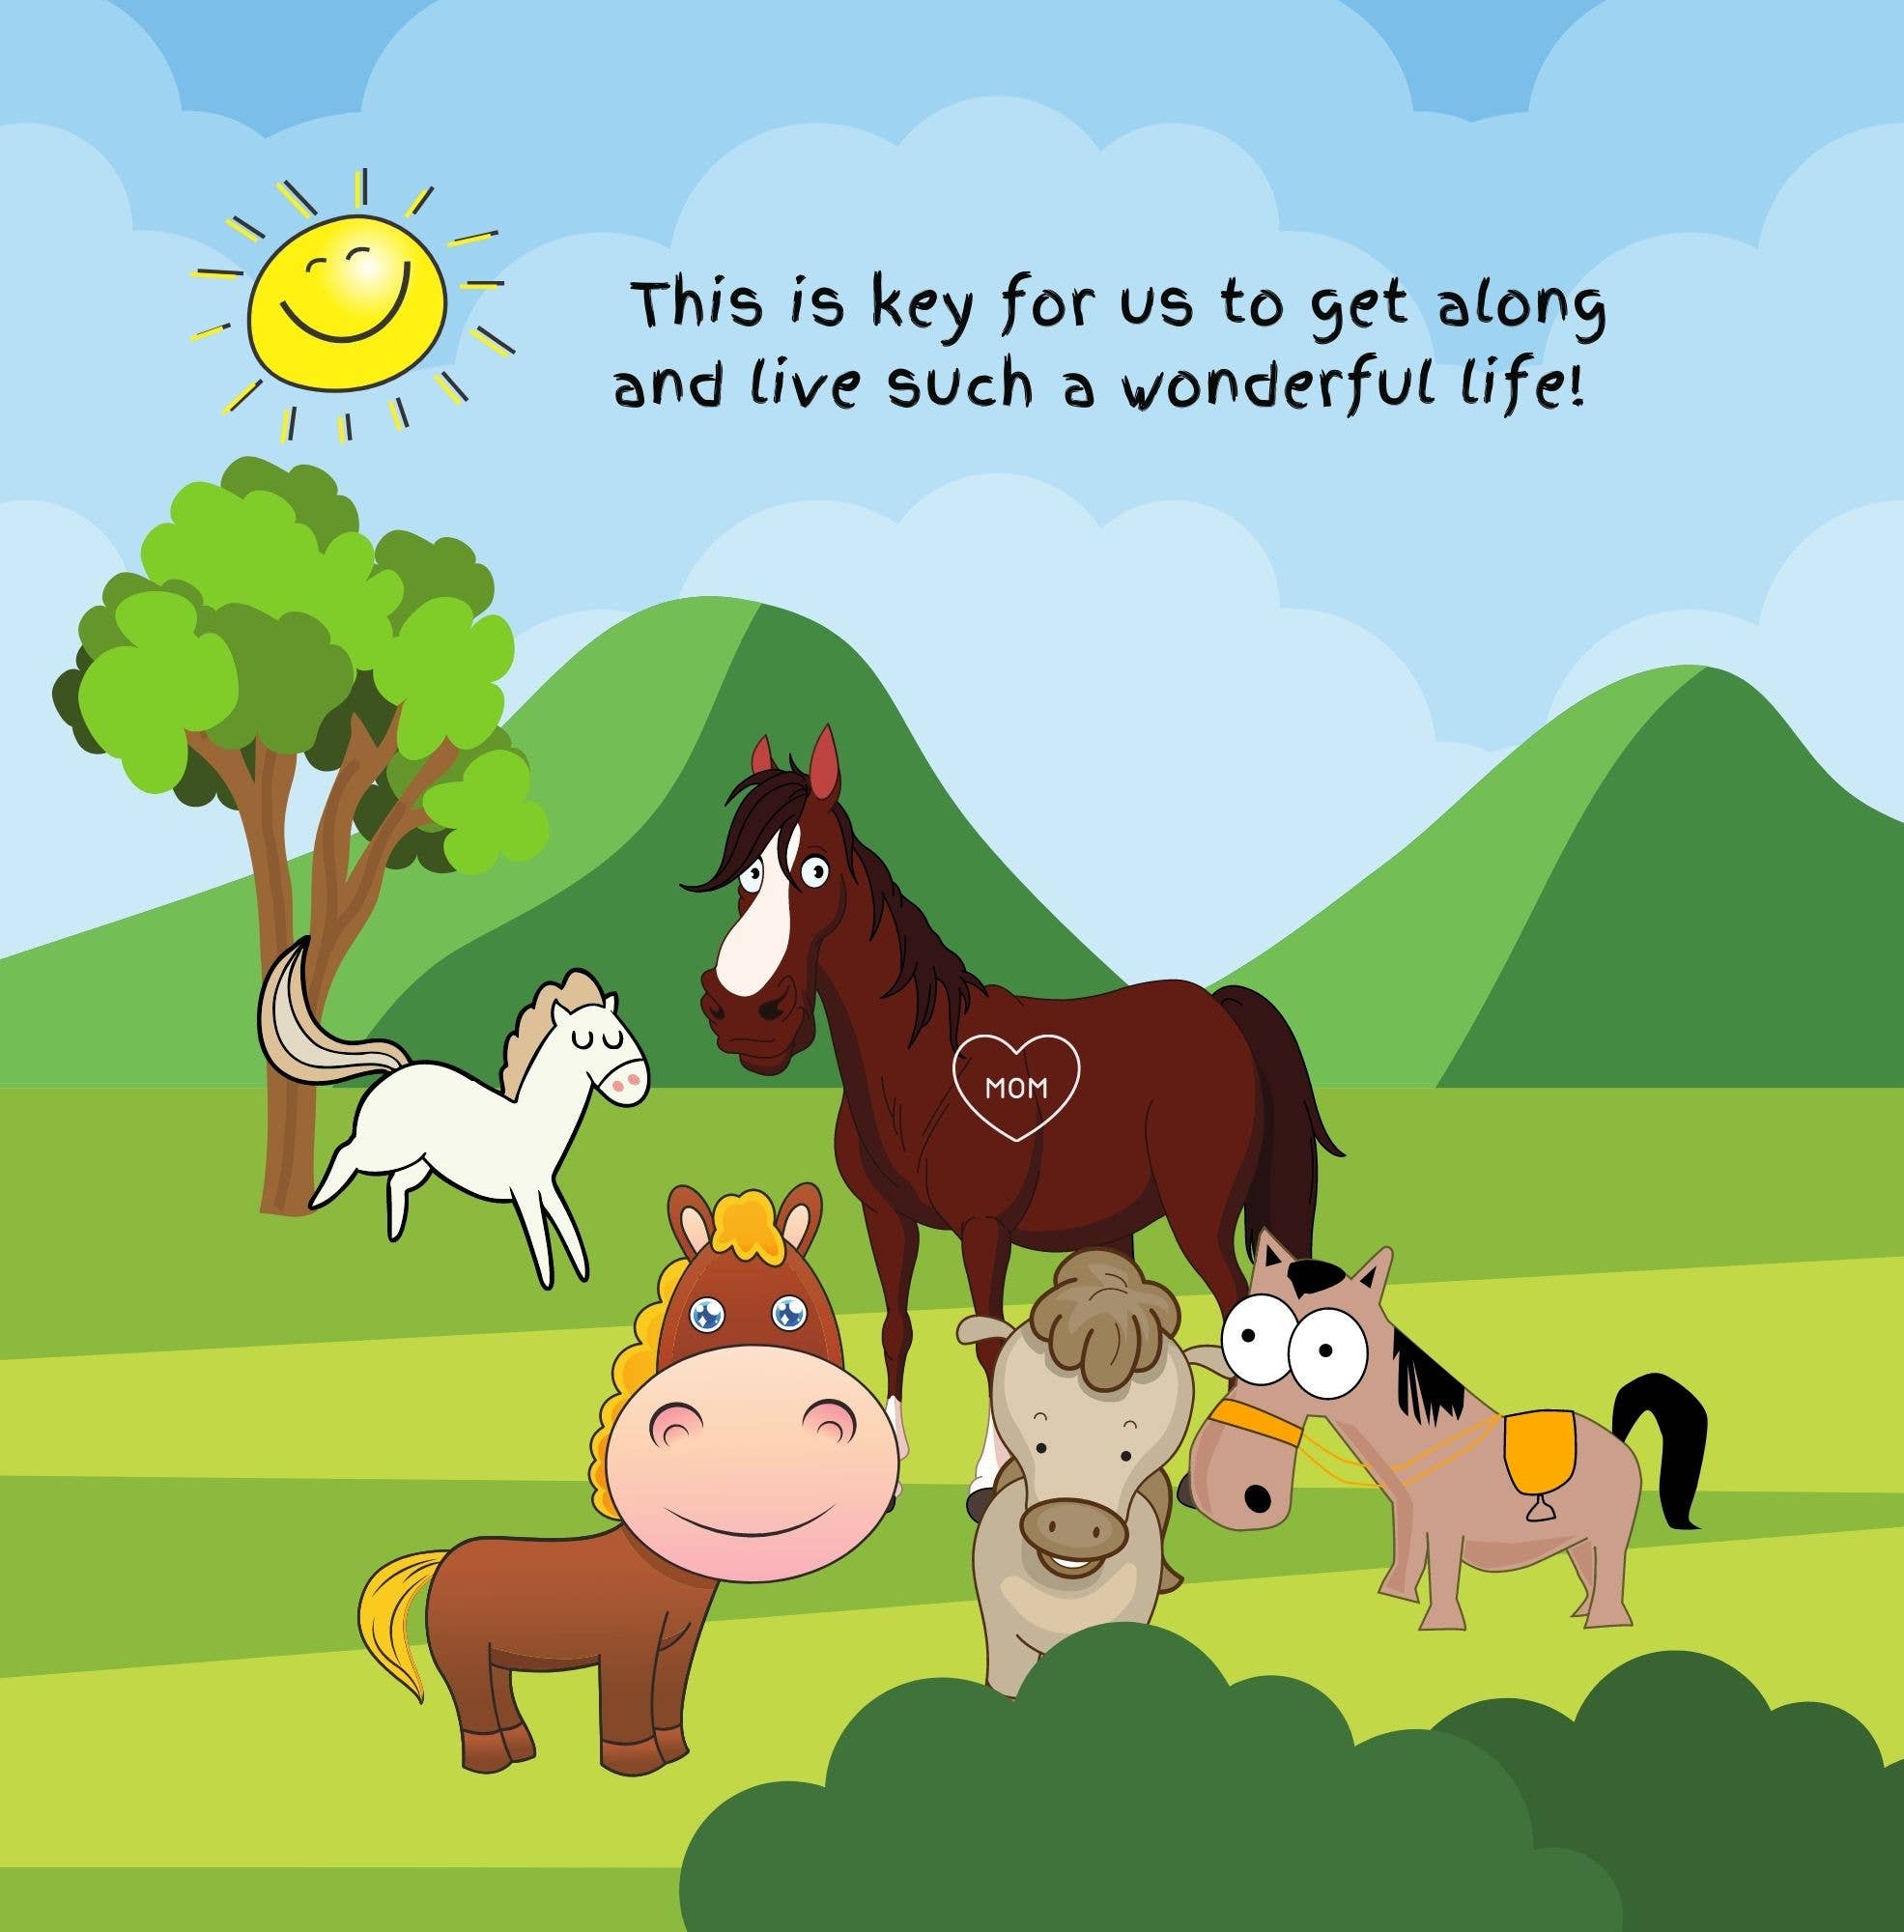 Lessons From Pete the Pony, Meet the Herd